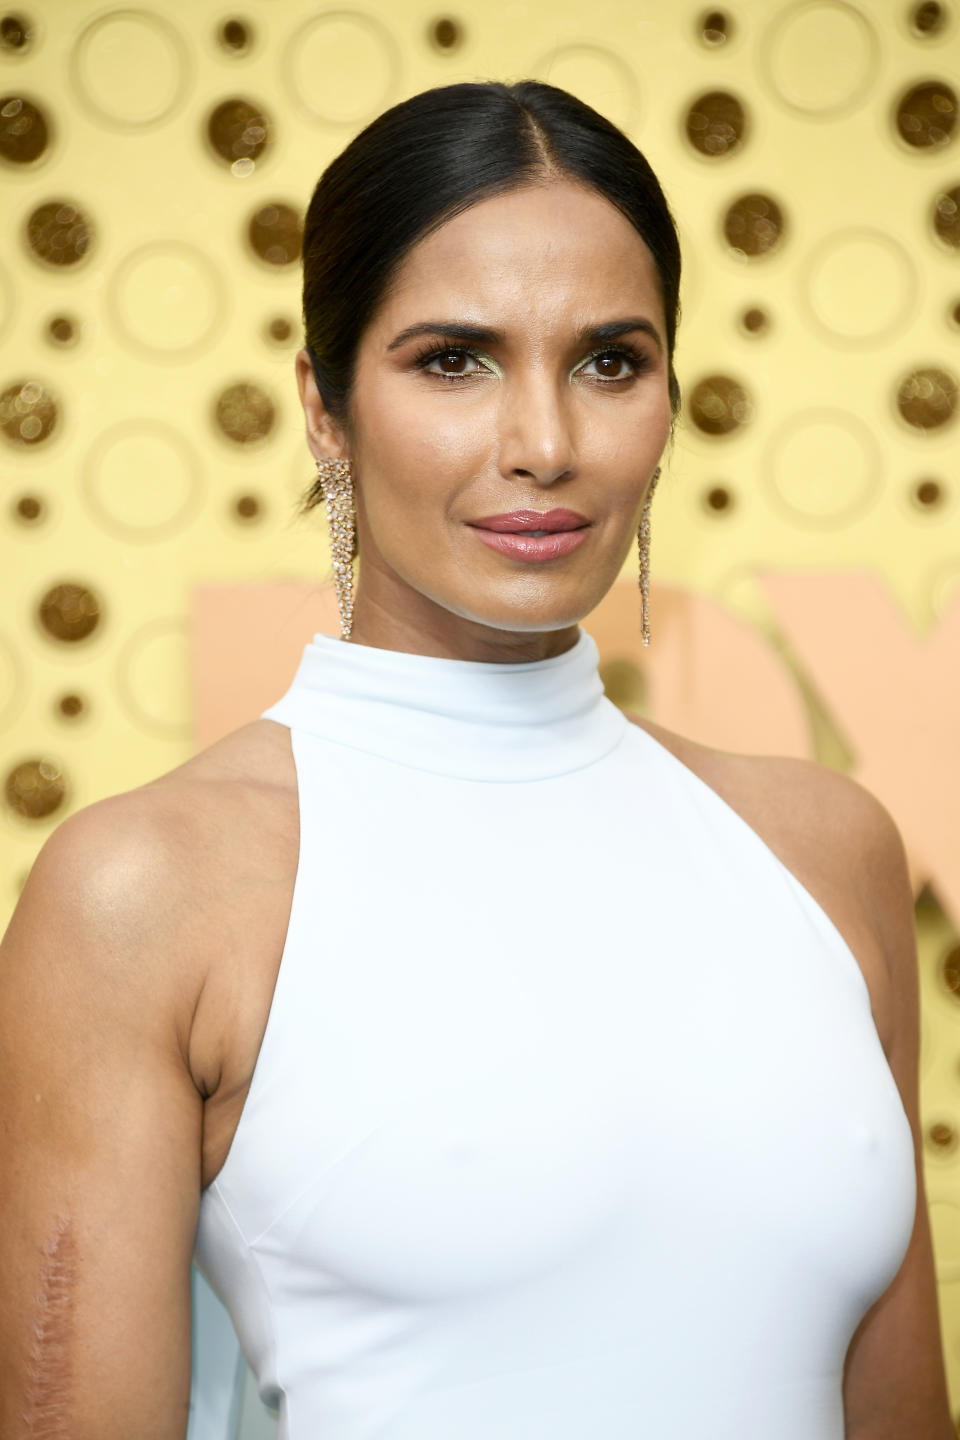 LOS ANGELES, CALIFORNIA - SEPTEMBER 22: Padma Lakshmi attends the 71st Emmy Awards at Microsoft Theater on September 22, 2019 in Los Angeles, California. (Photo by Frazer Harrison/Getty Images)